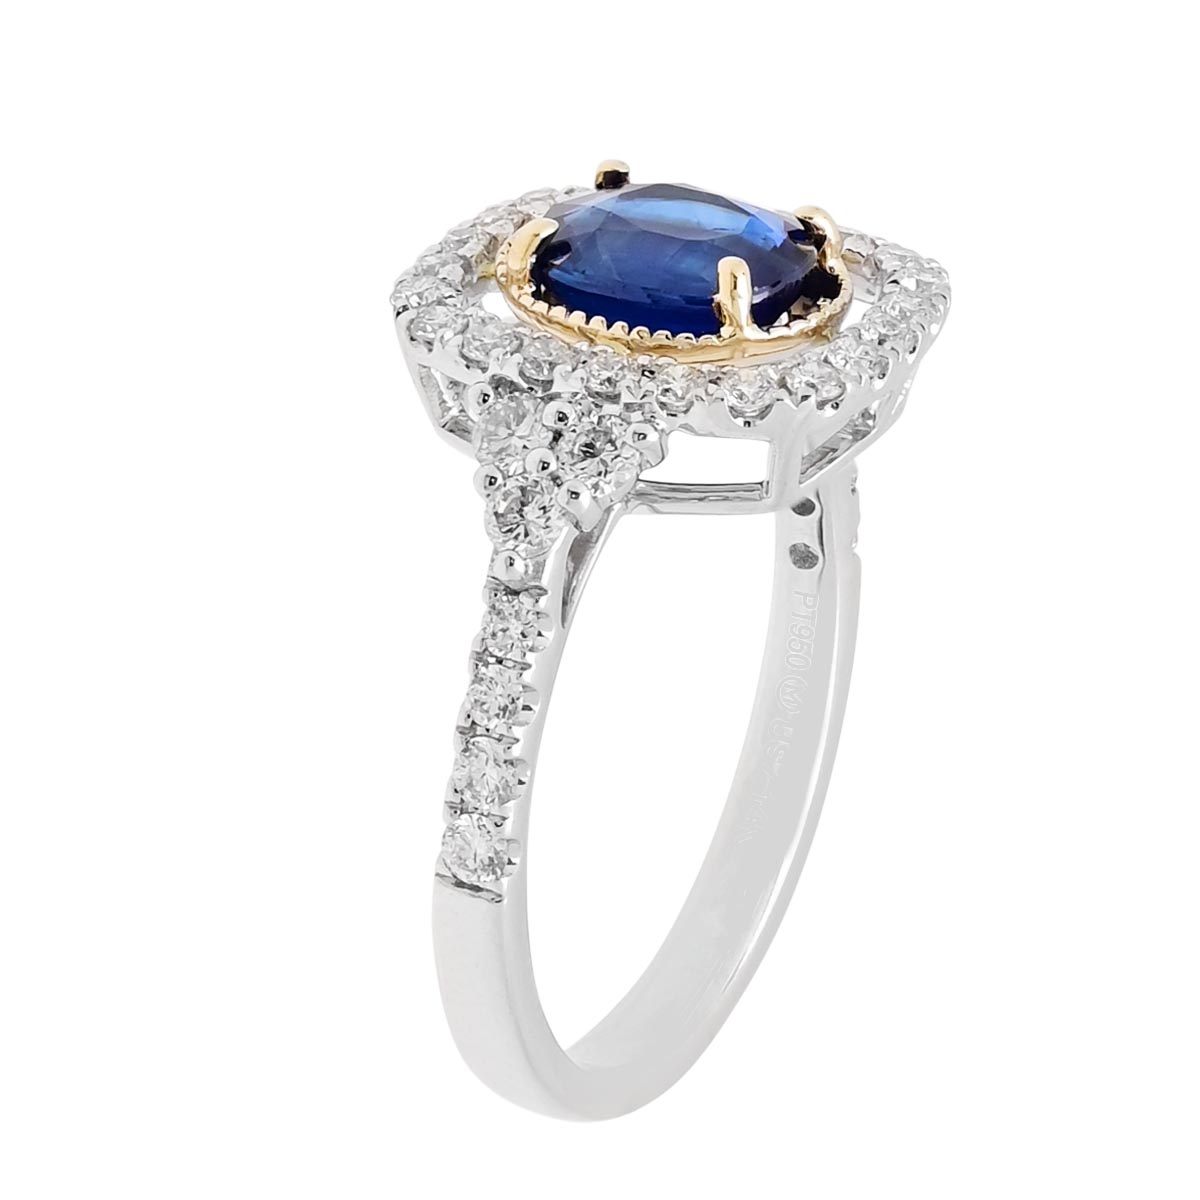 Oval Sapphire Ring in Platinum and 14kt Yellow Gold with Diamonds (5/8ct tw)